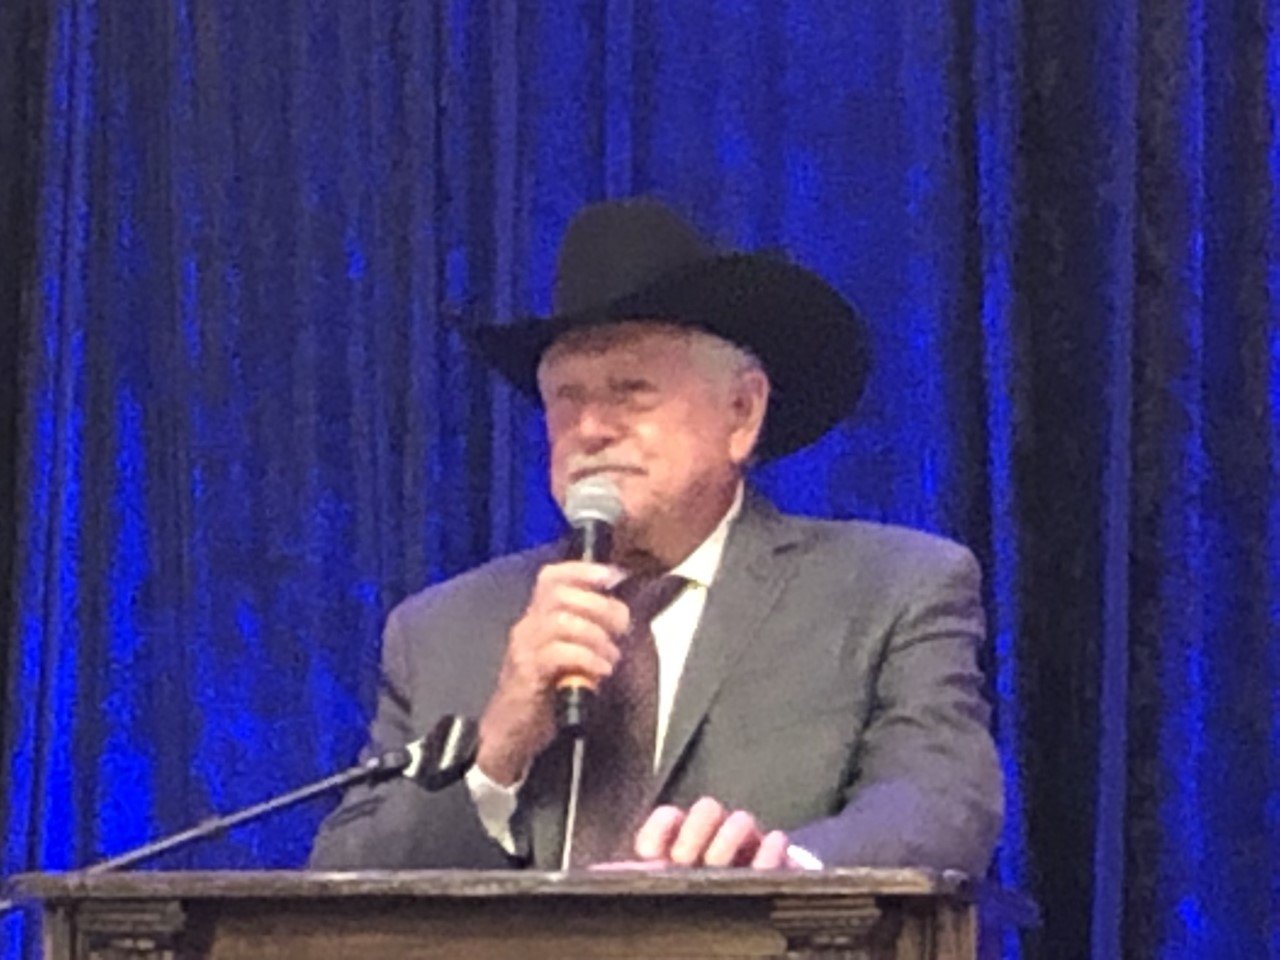 Auctioneer Glenn Beckendorff encourages guests to purchase one of 10 items put up for sale in a live auction at the 18th annual Katy Christian Ministries Transforming Lives Gala. The gala was held at Safari Texas Ranch in Richmond.